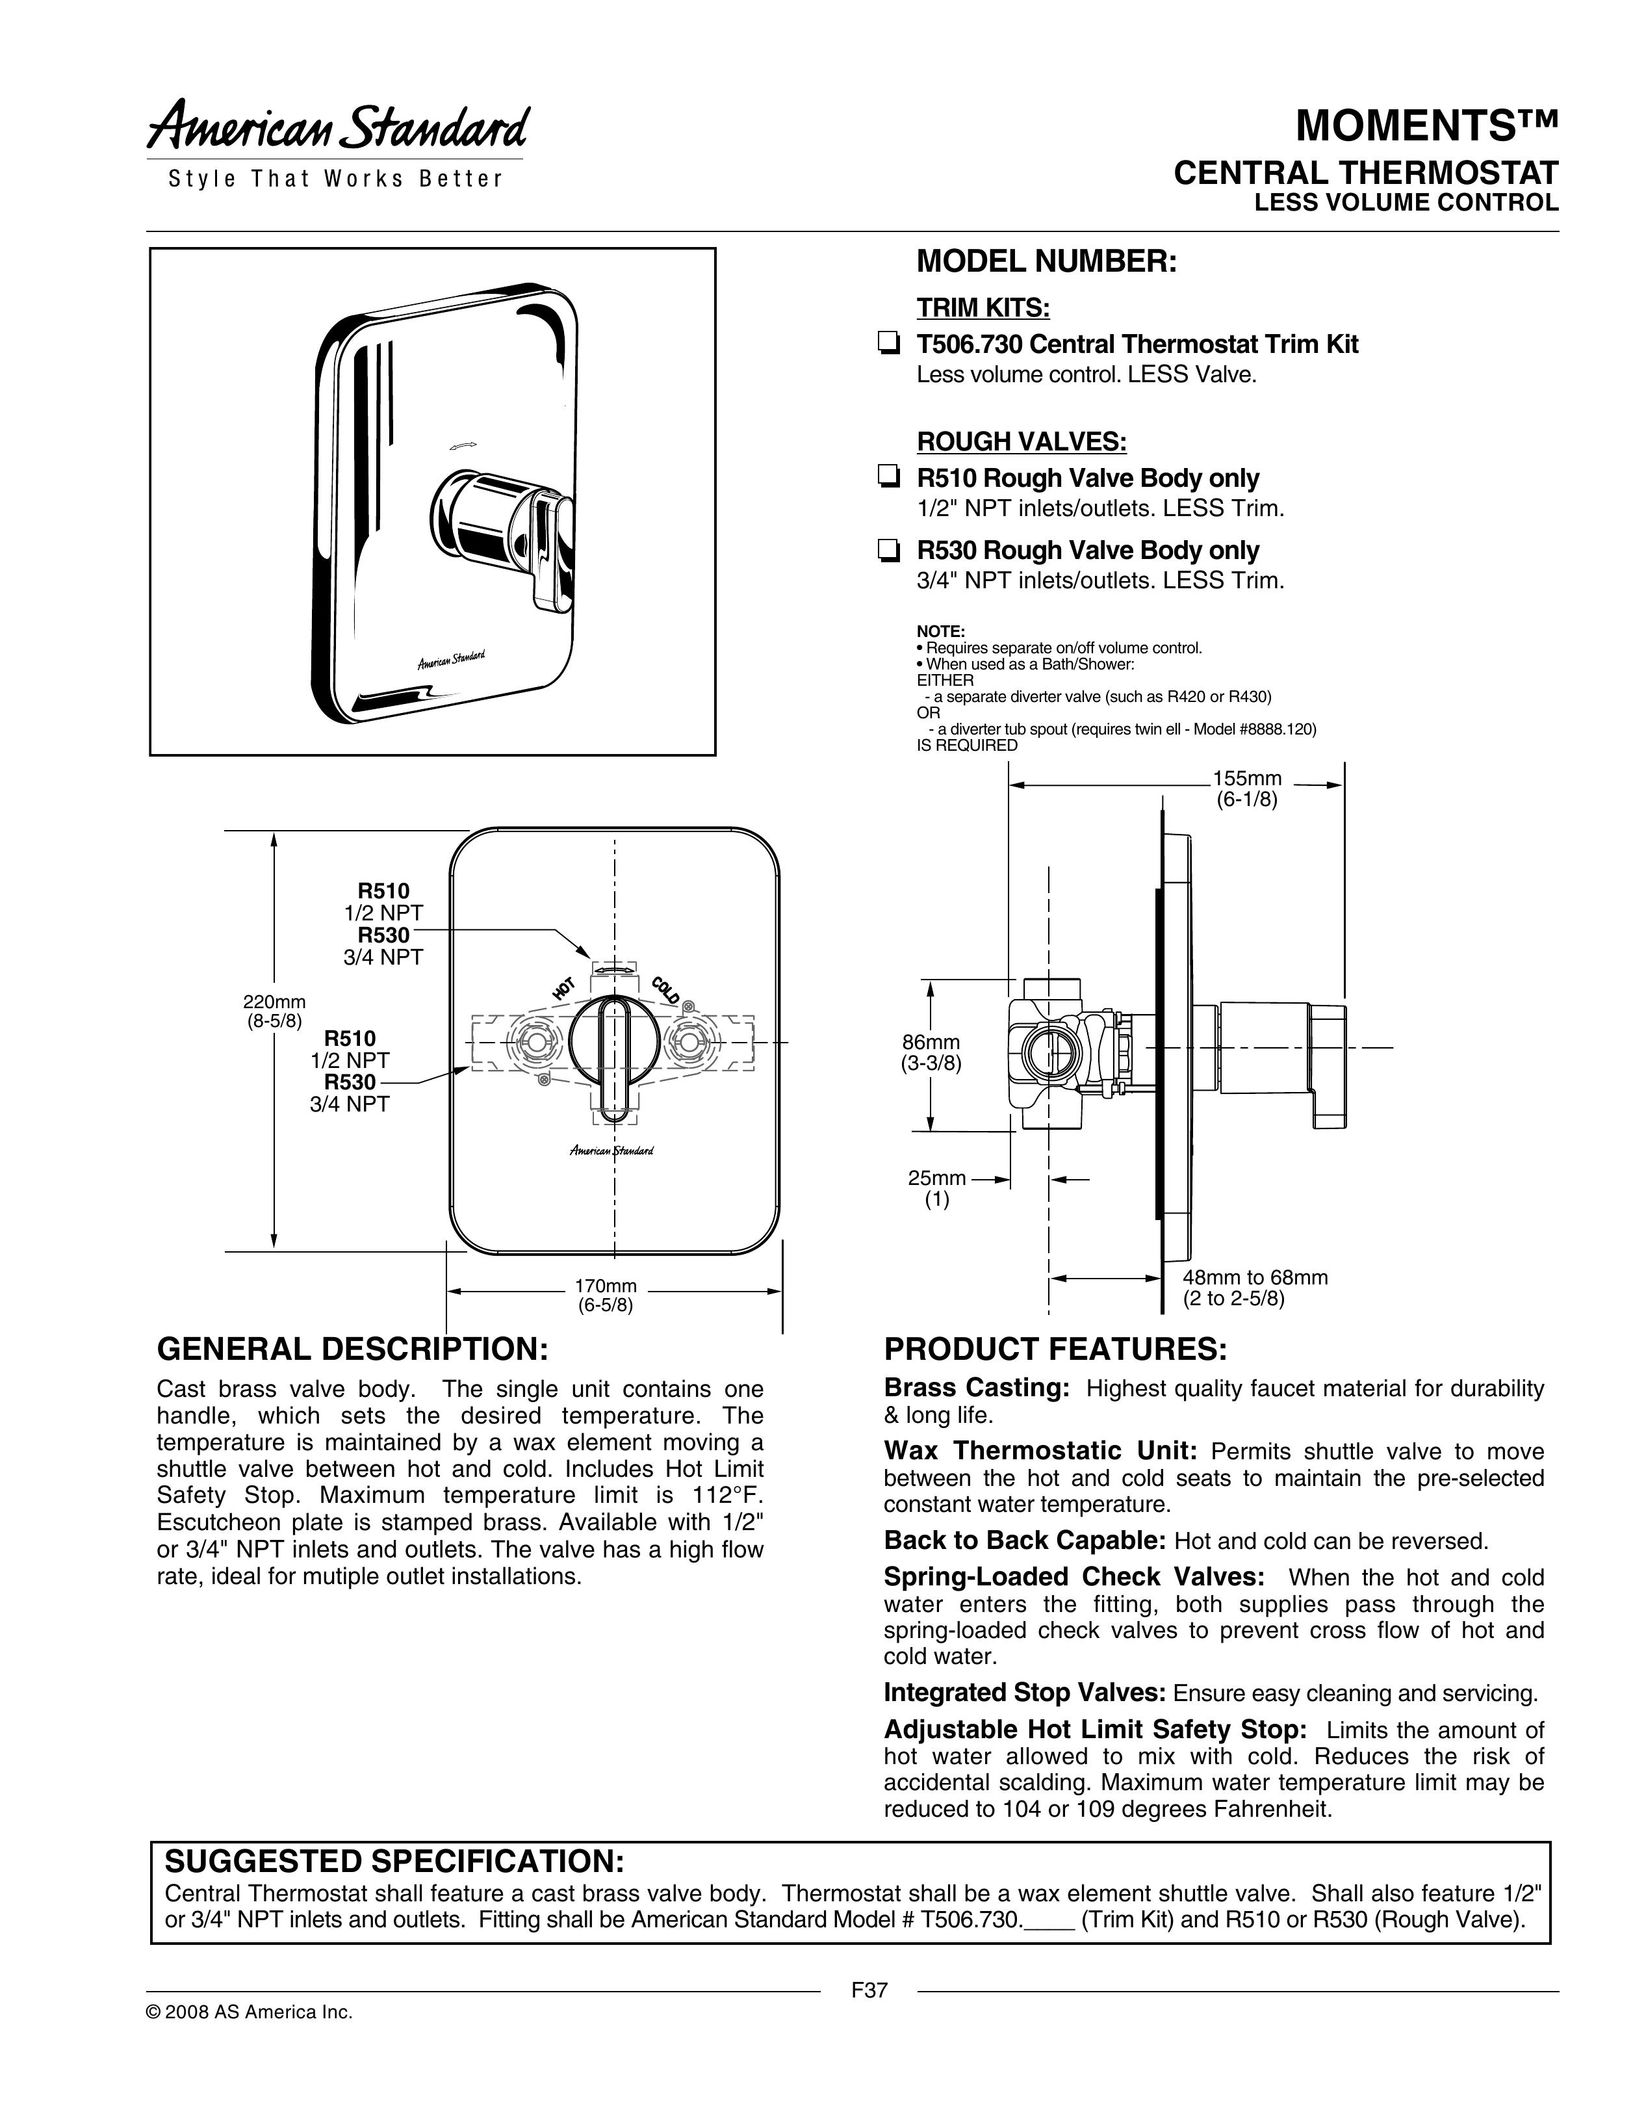 American Standard T506.730 Thermostat User Manual